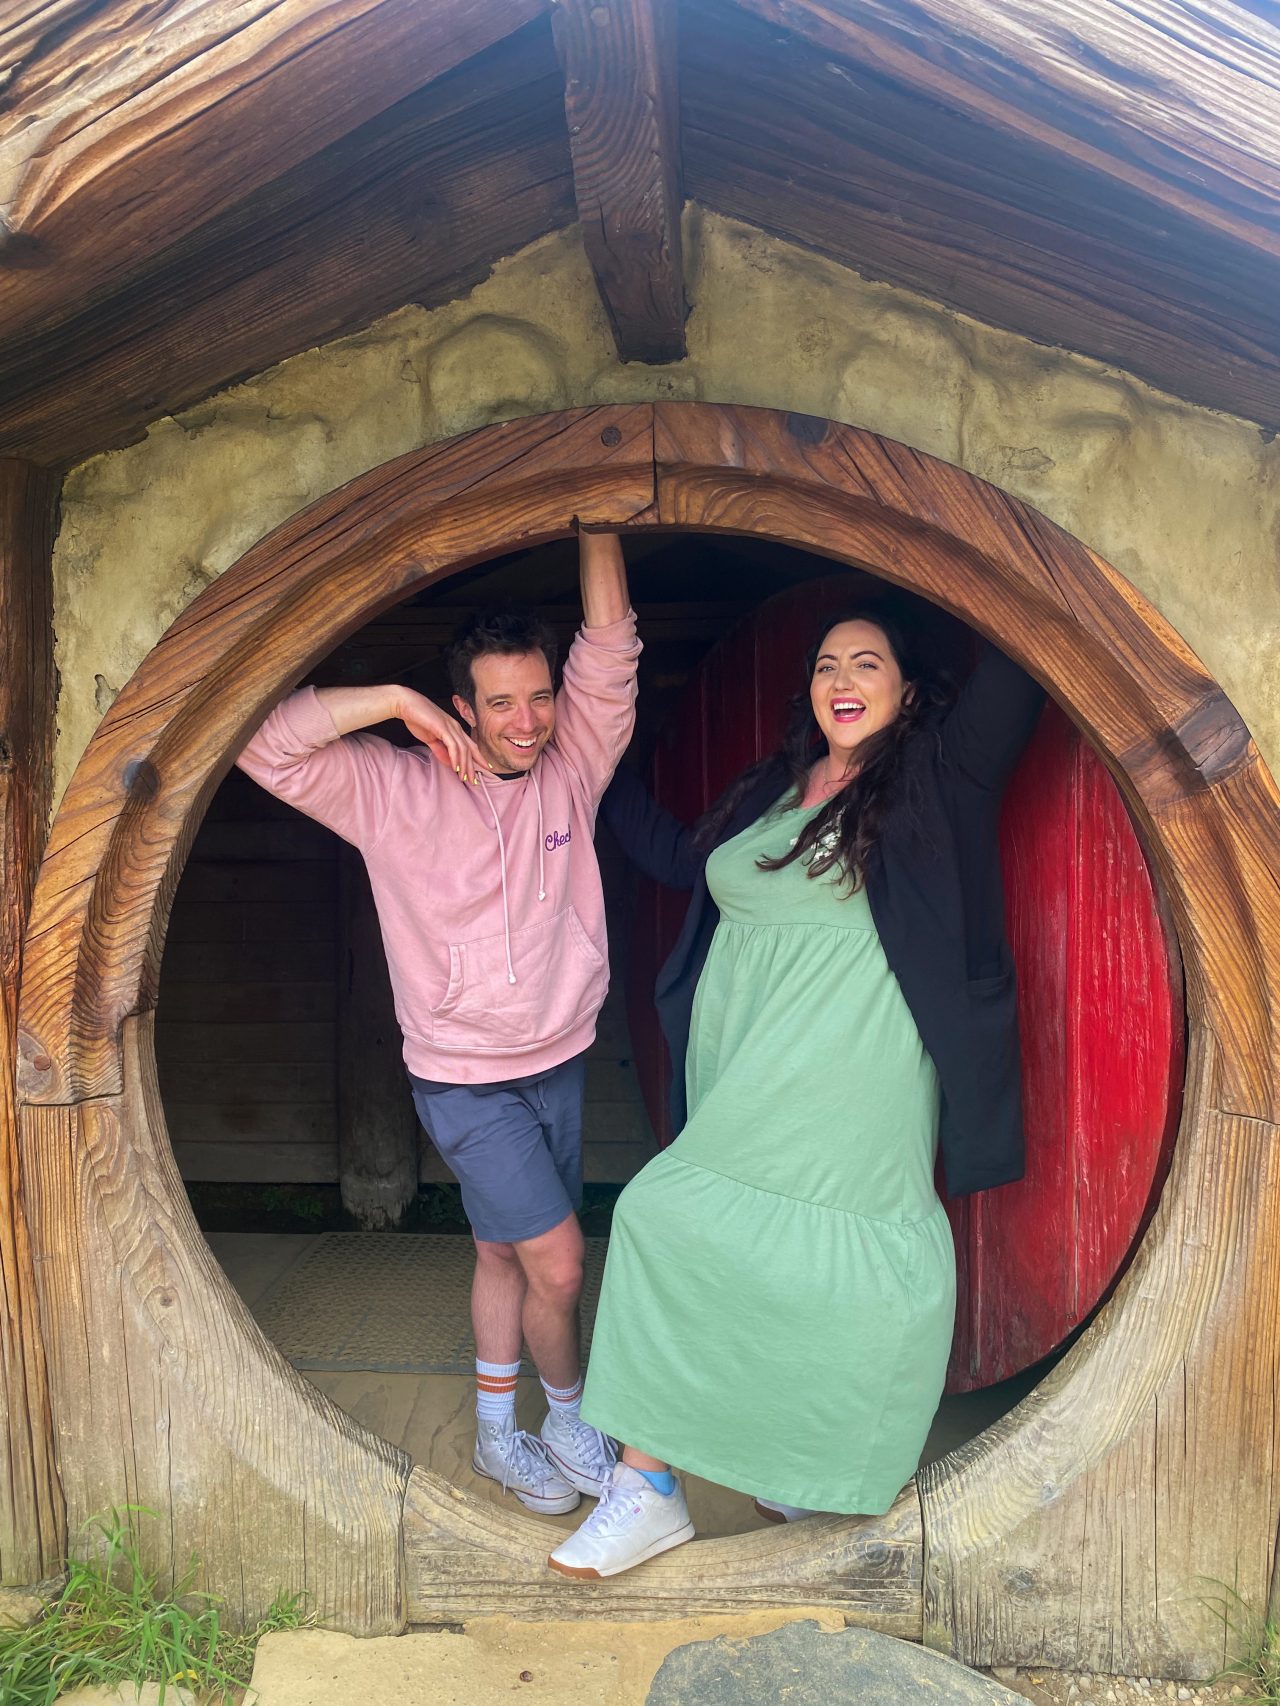 The hobbiton set now on Airbnb